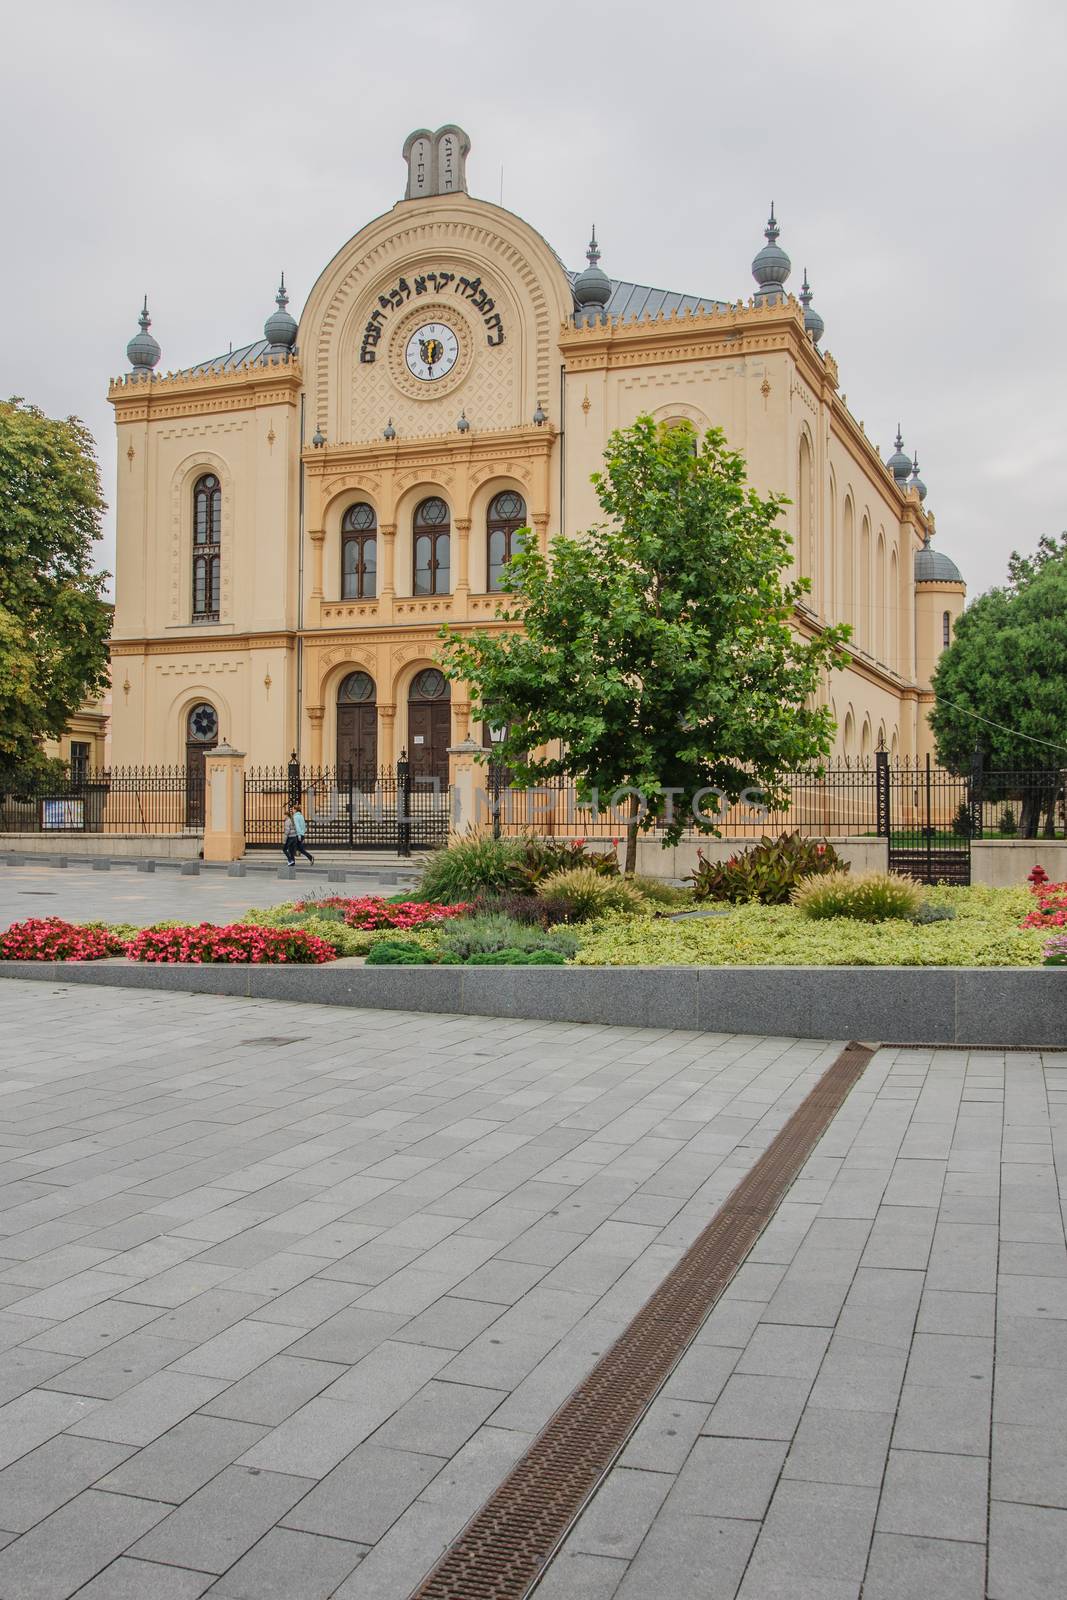 The old synagogue in Pecs, Hungary